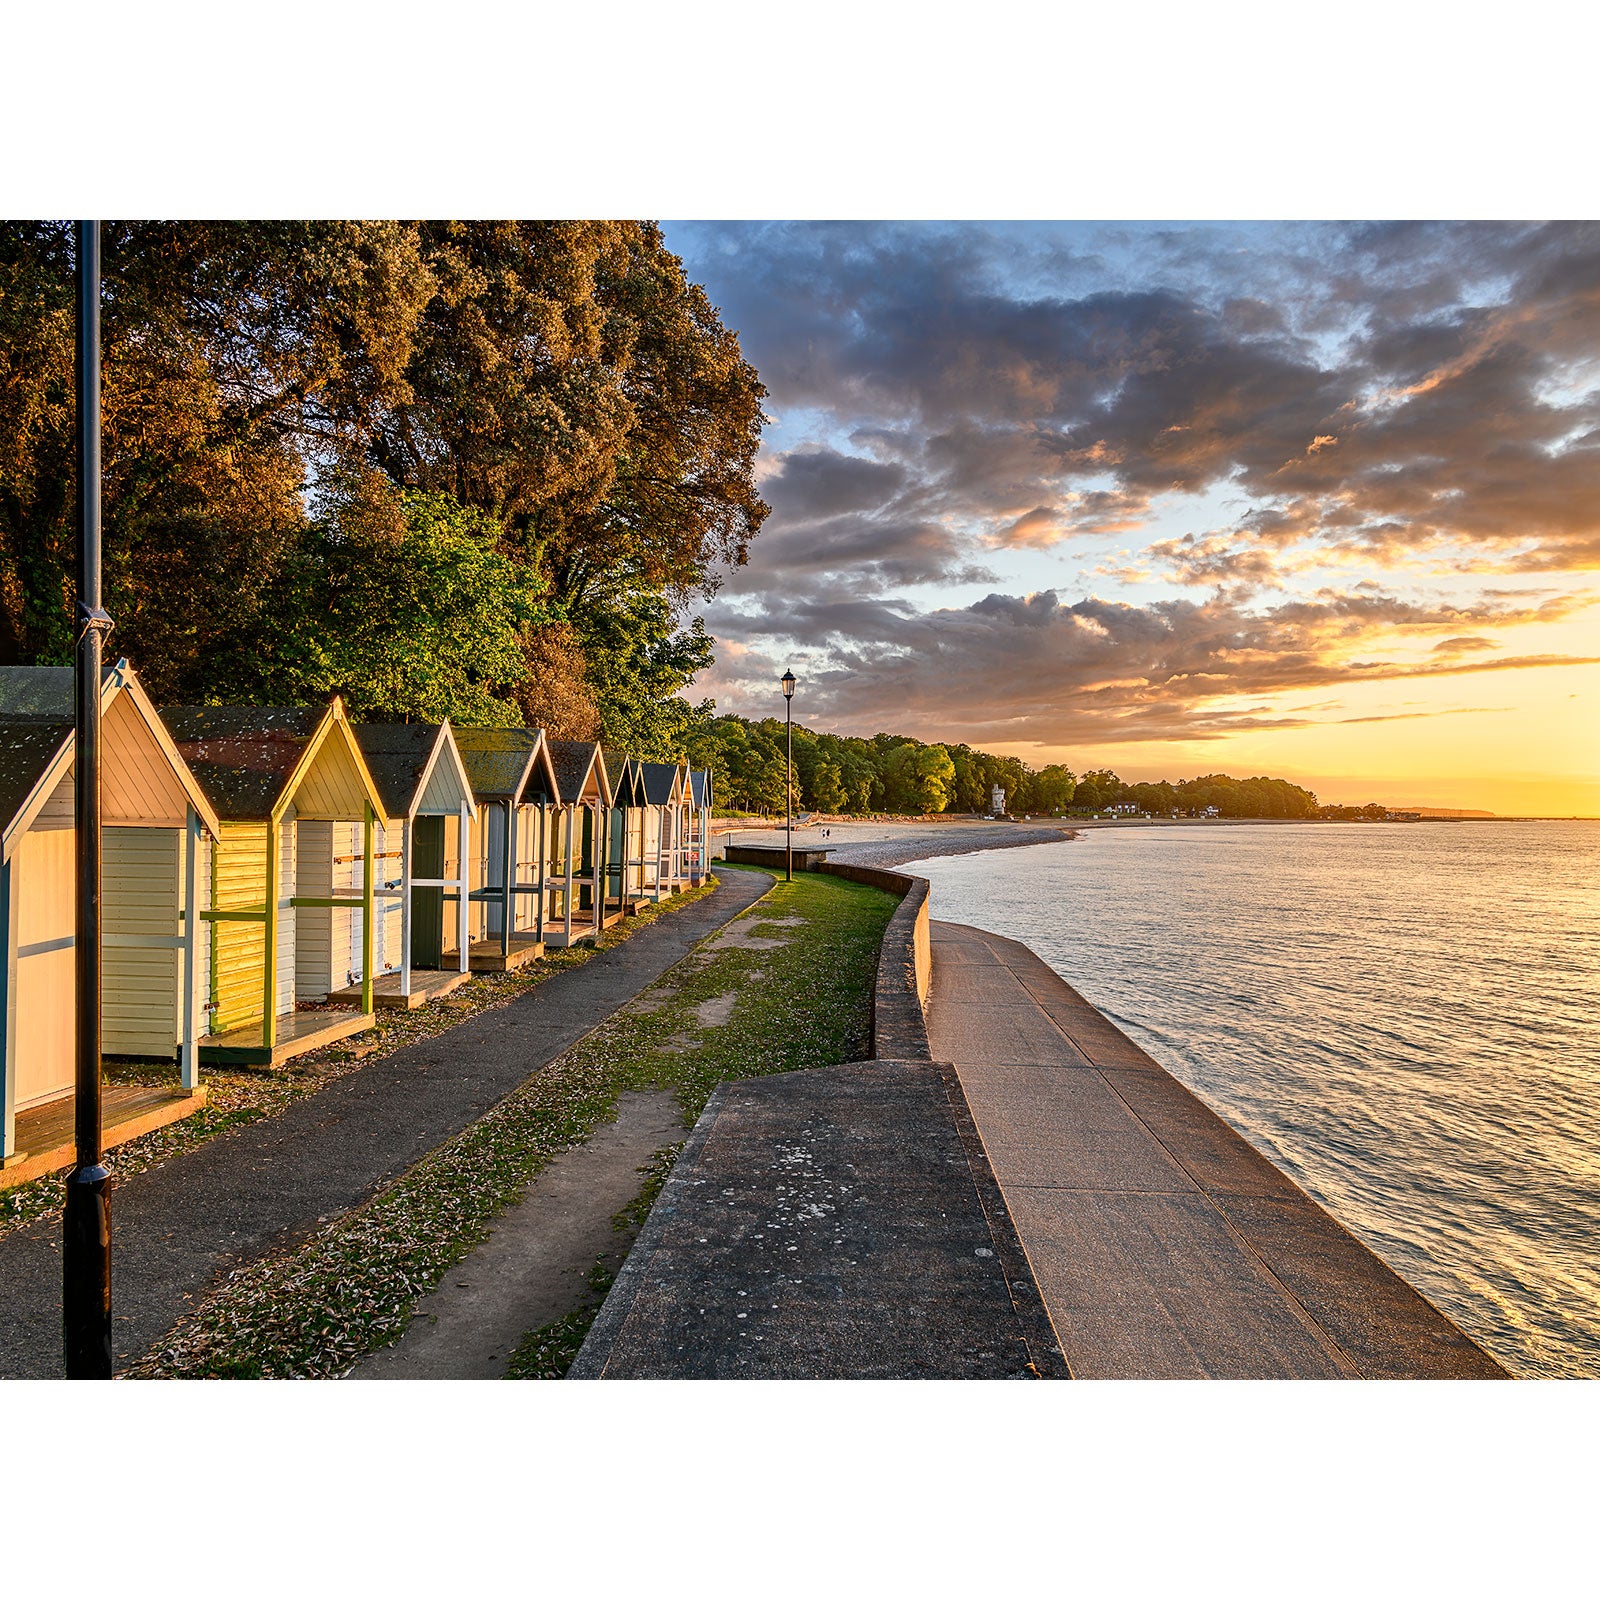 A row of colorful beach huts beside a walkway under a sunset sky at Puckpool Point on the Isle of Wight, captured by Available Light Photography.